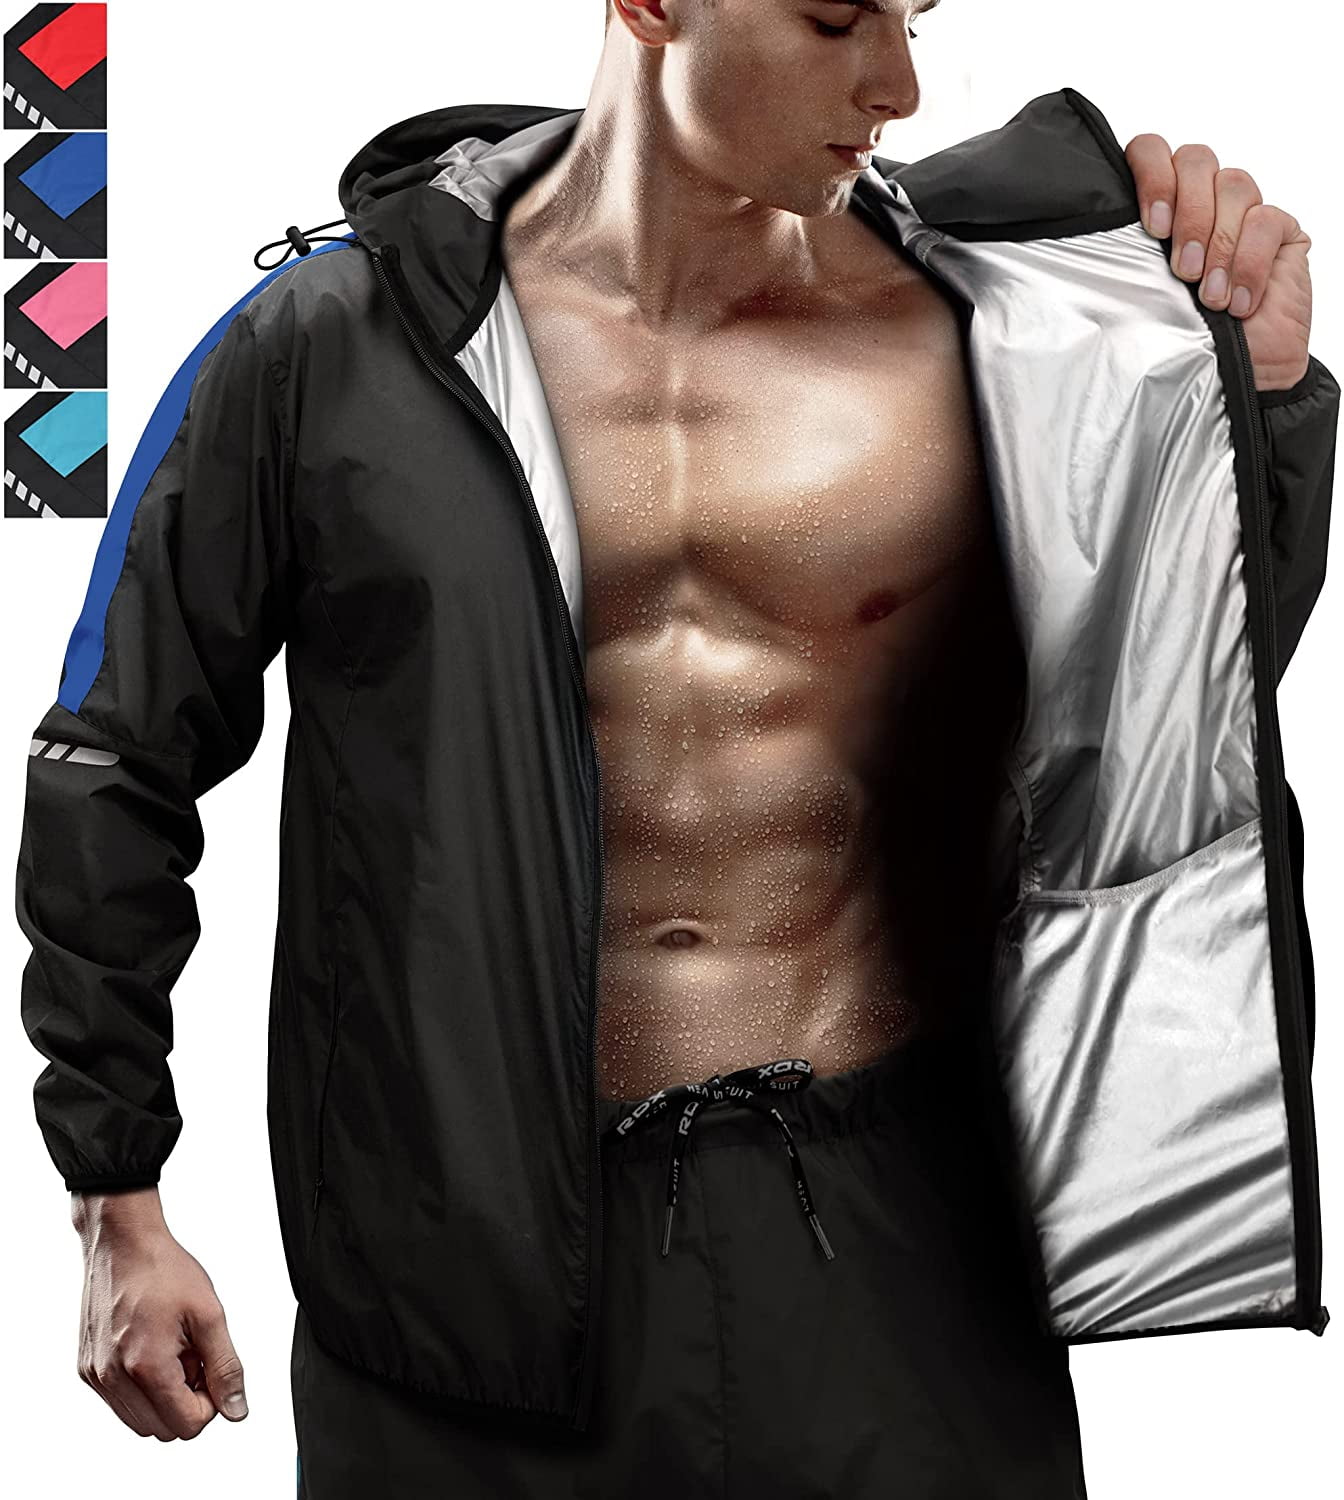 Sauna Sweat Suit MMA Boxing Track Weight Loss Slimming Fitness Gym Red & Silver 